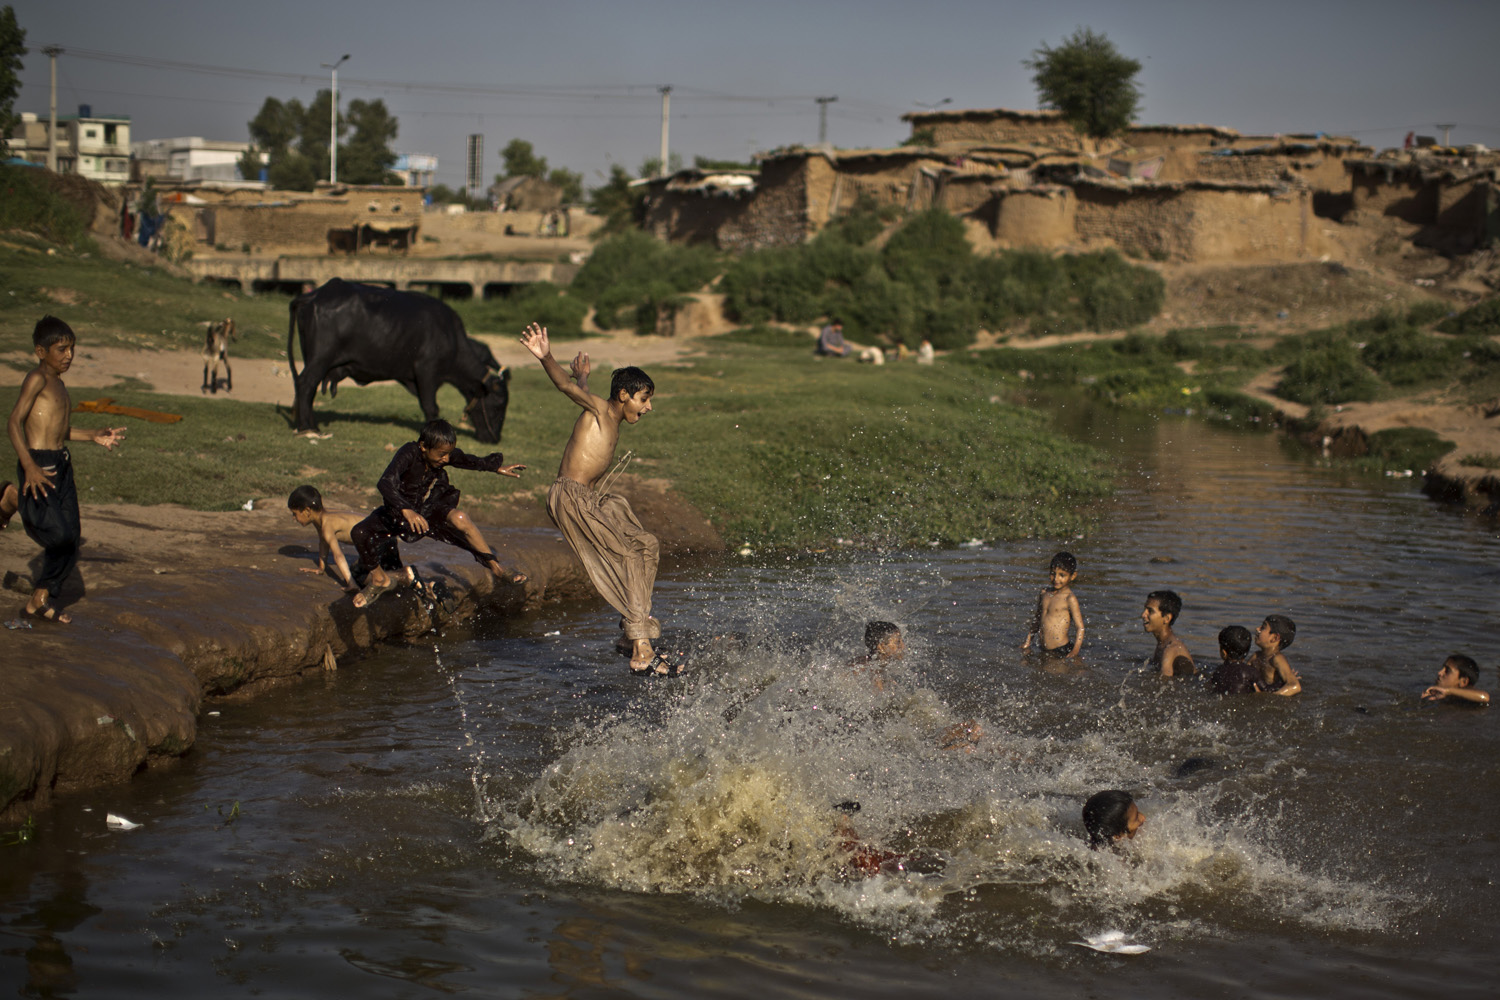 An Afghan refugee boy jumps into the water while he and others swim in a polluted stream to cool off as the temperature rises, on the outskirts of Islamabad, Pakistan on May 28, 2014.